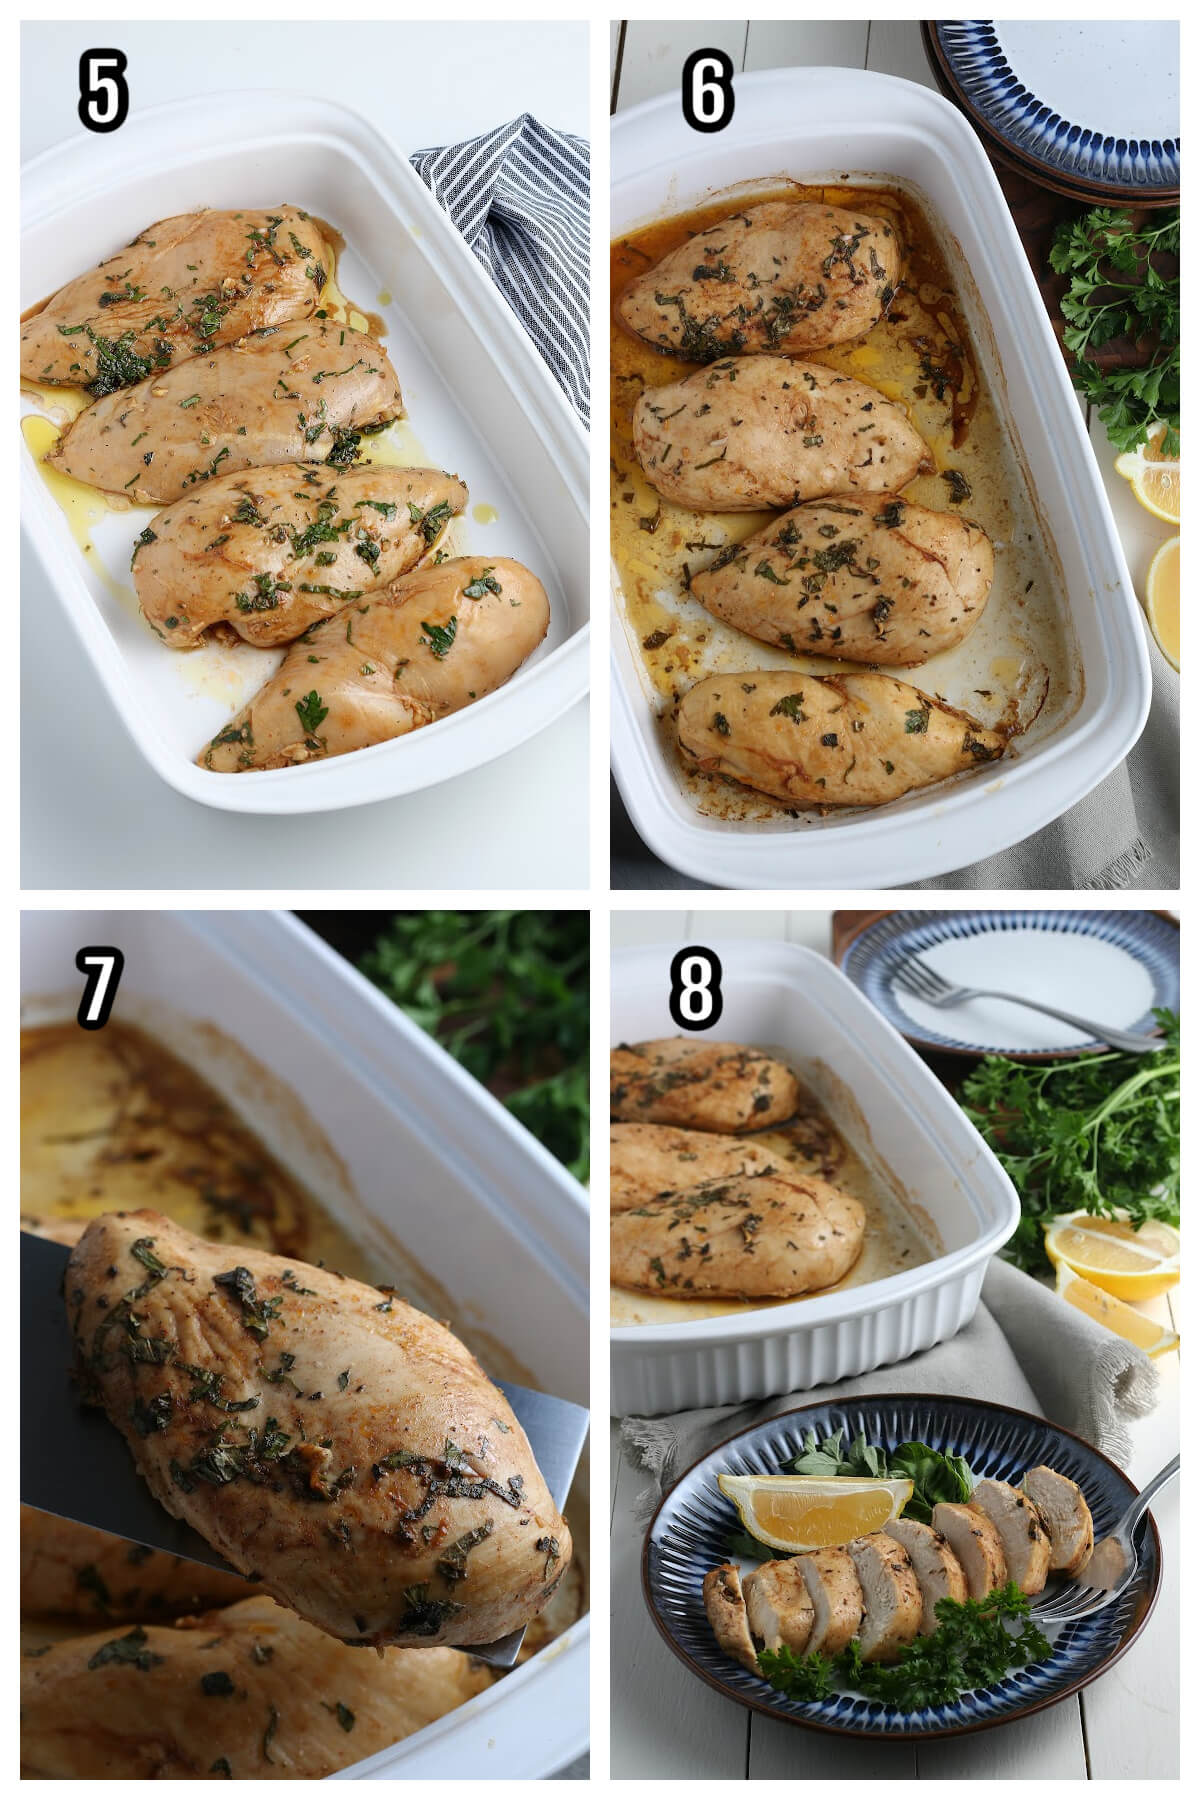 Second set of four steps to oven baking the boneless skinless chicken breasts. 